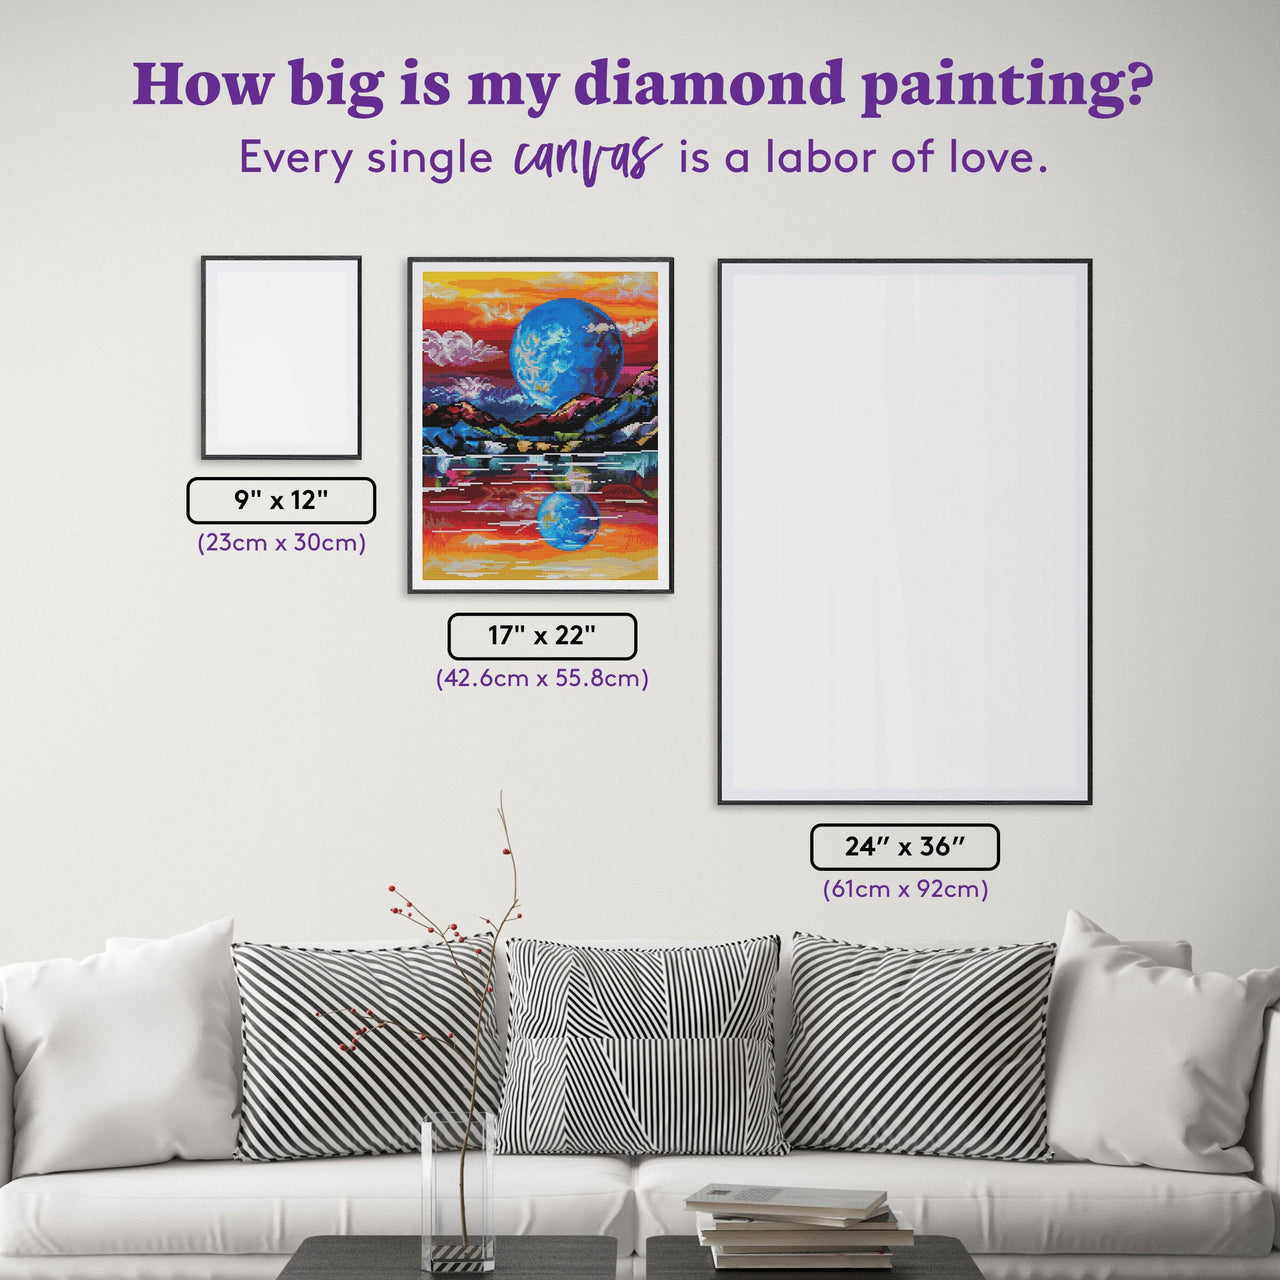 Diamond Painting Somewhere 17" x 22" (42.6cm x 55.8cm) / Round with 53 Colors including 4 ABs / 30,248